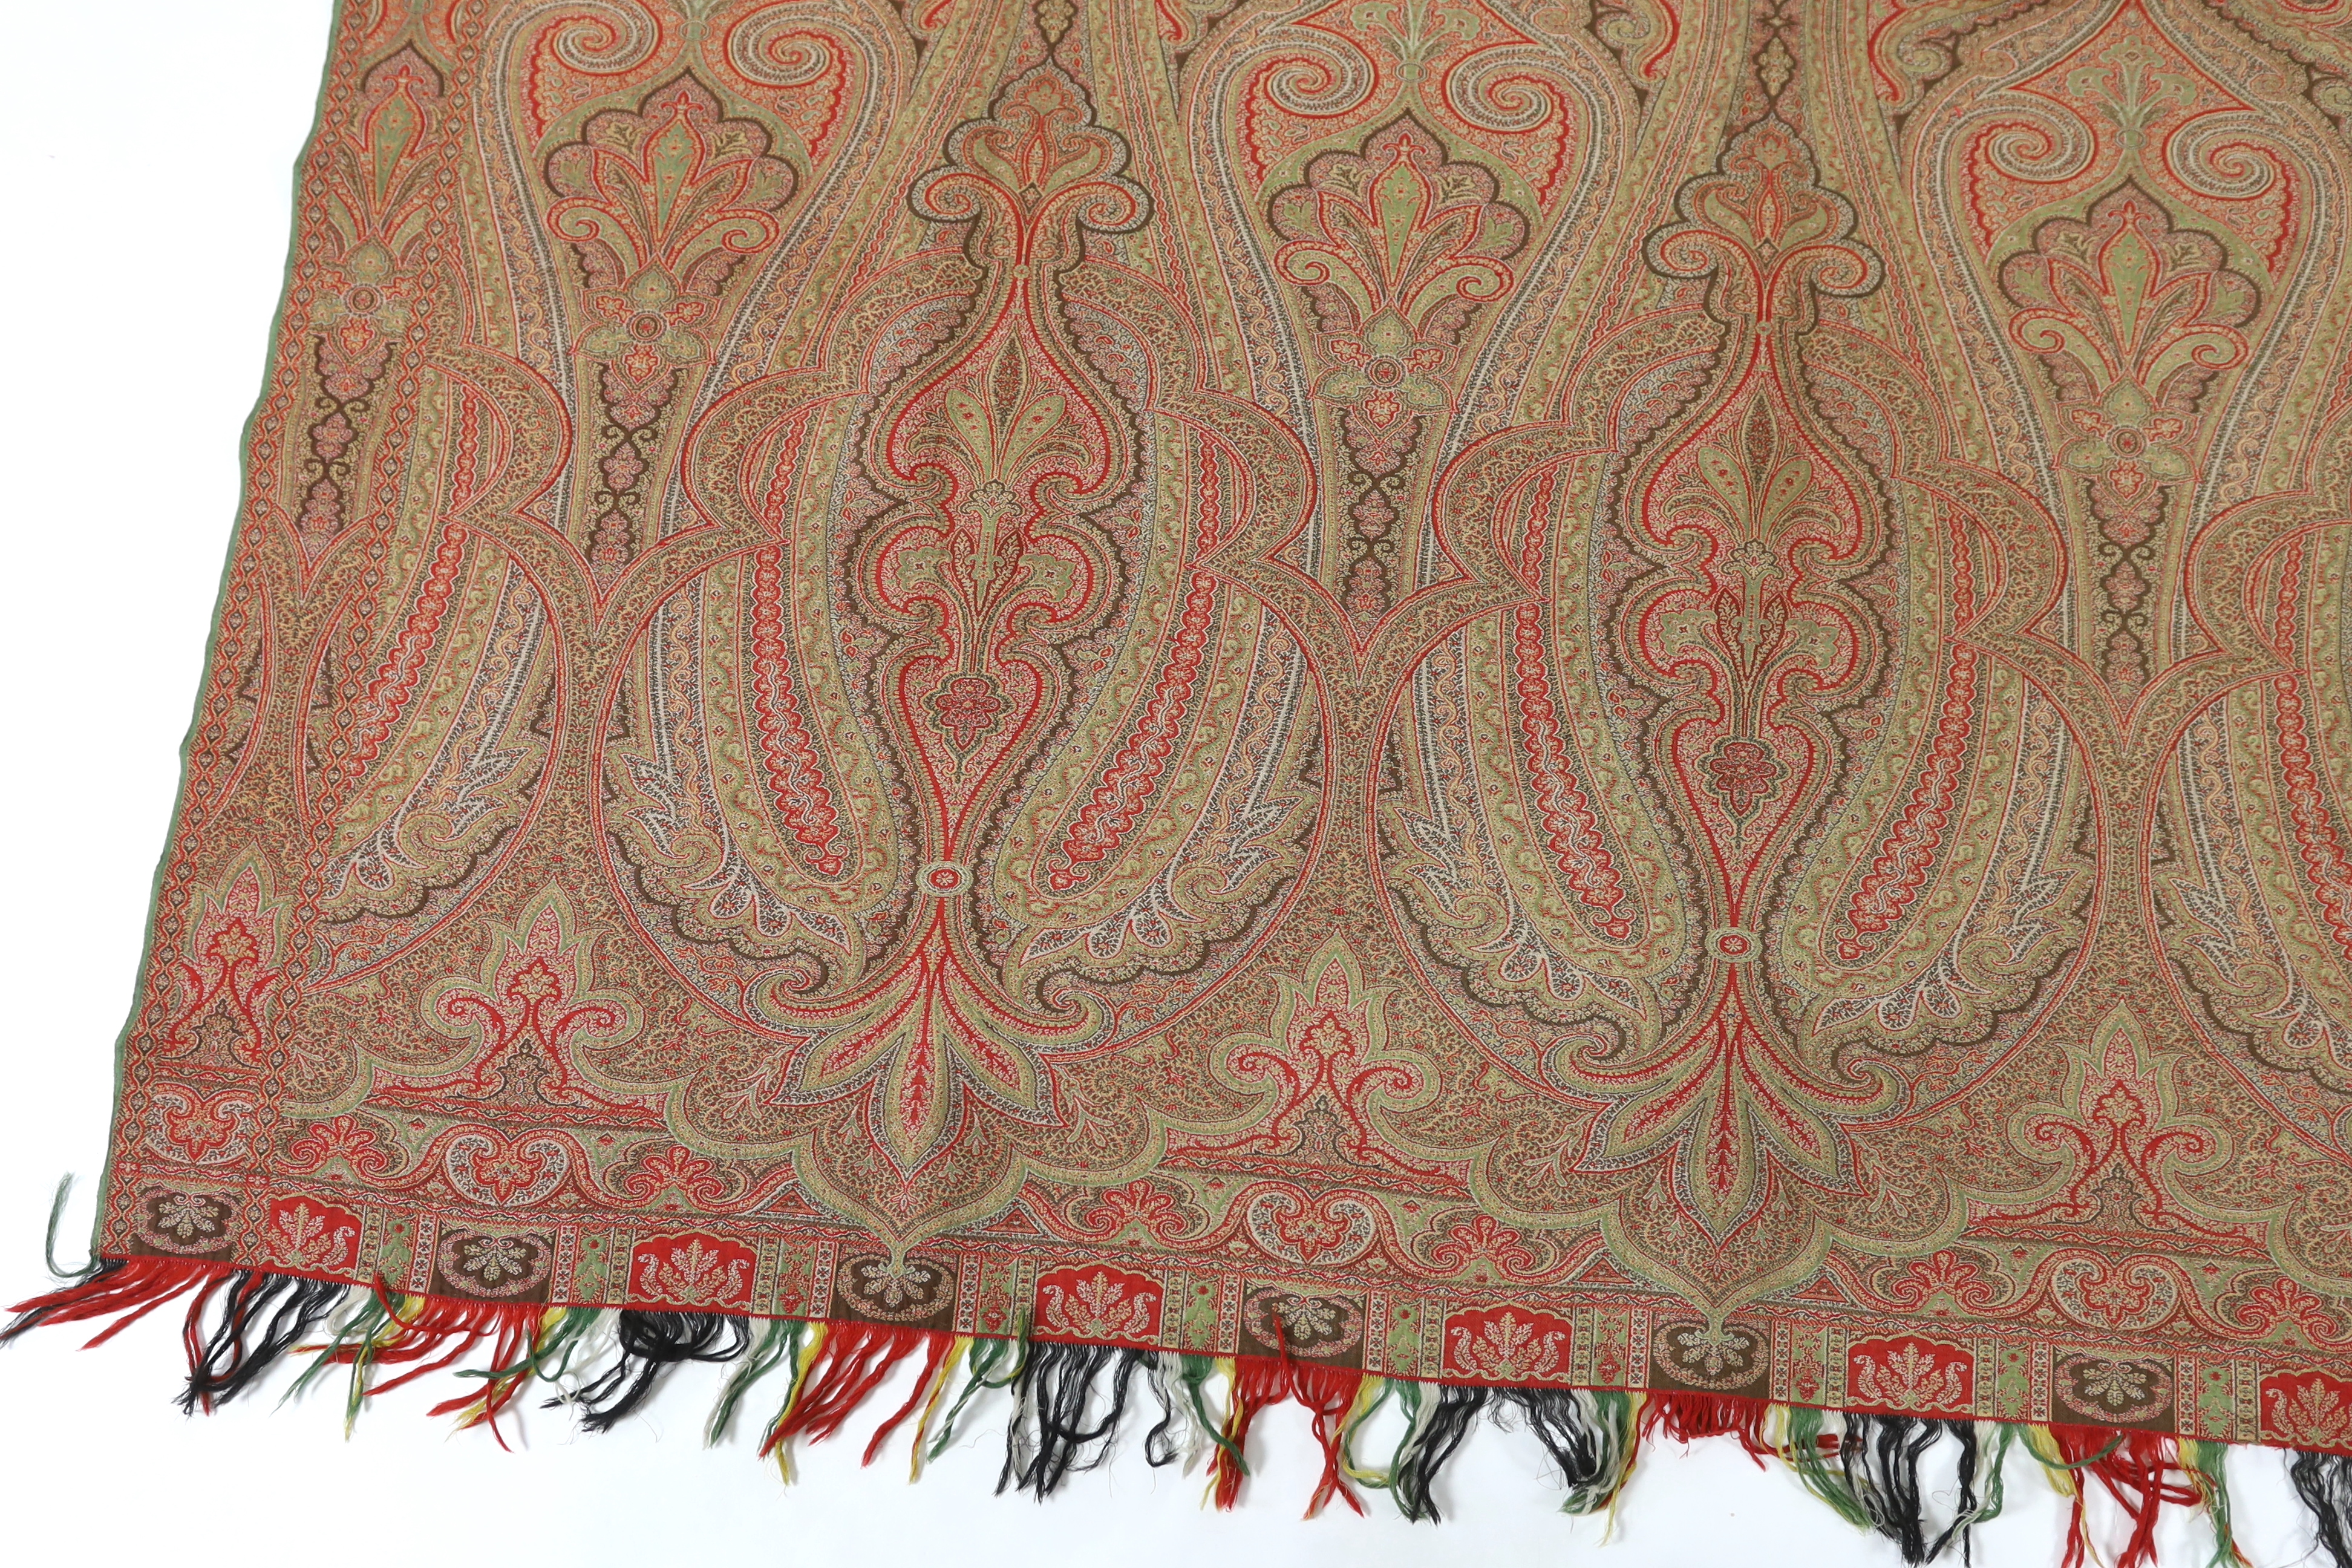 An 1860’s, reversible woven wool Paisley shawl, woven with green, red, ochre and brown, with a woven border and fringing both ends. 166cm wide x 169cm long